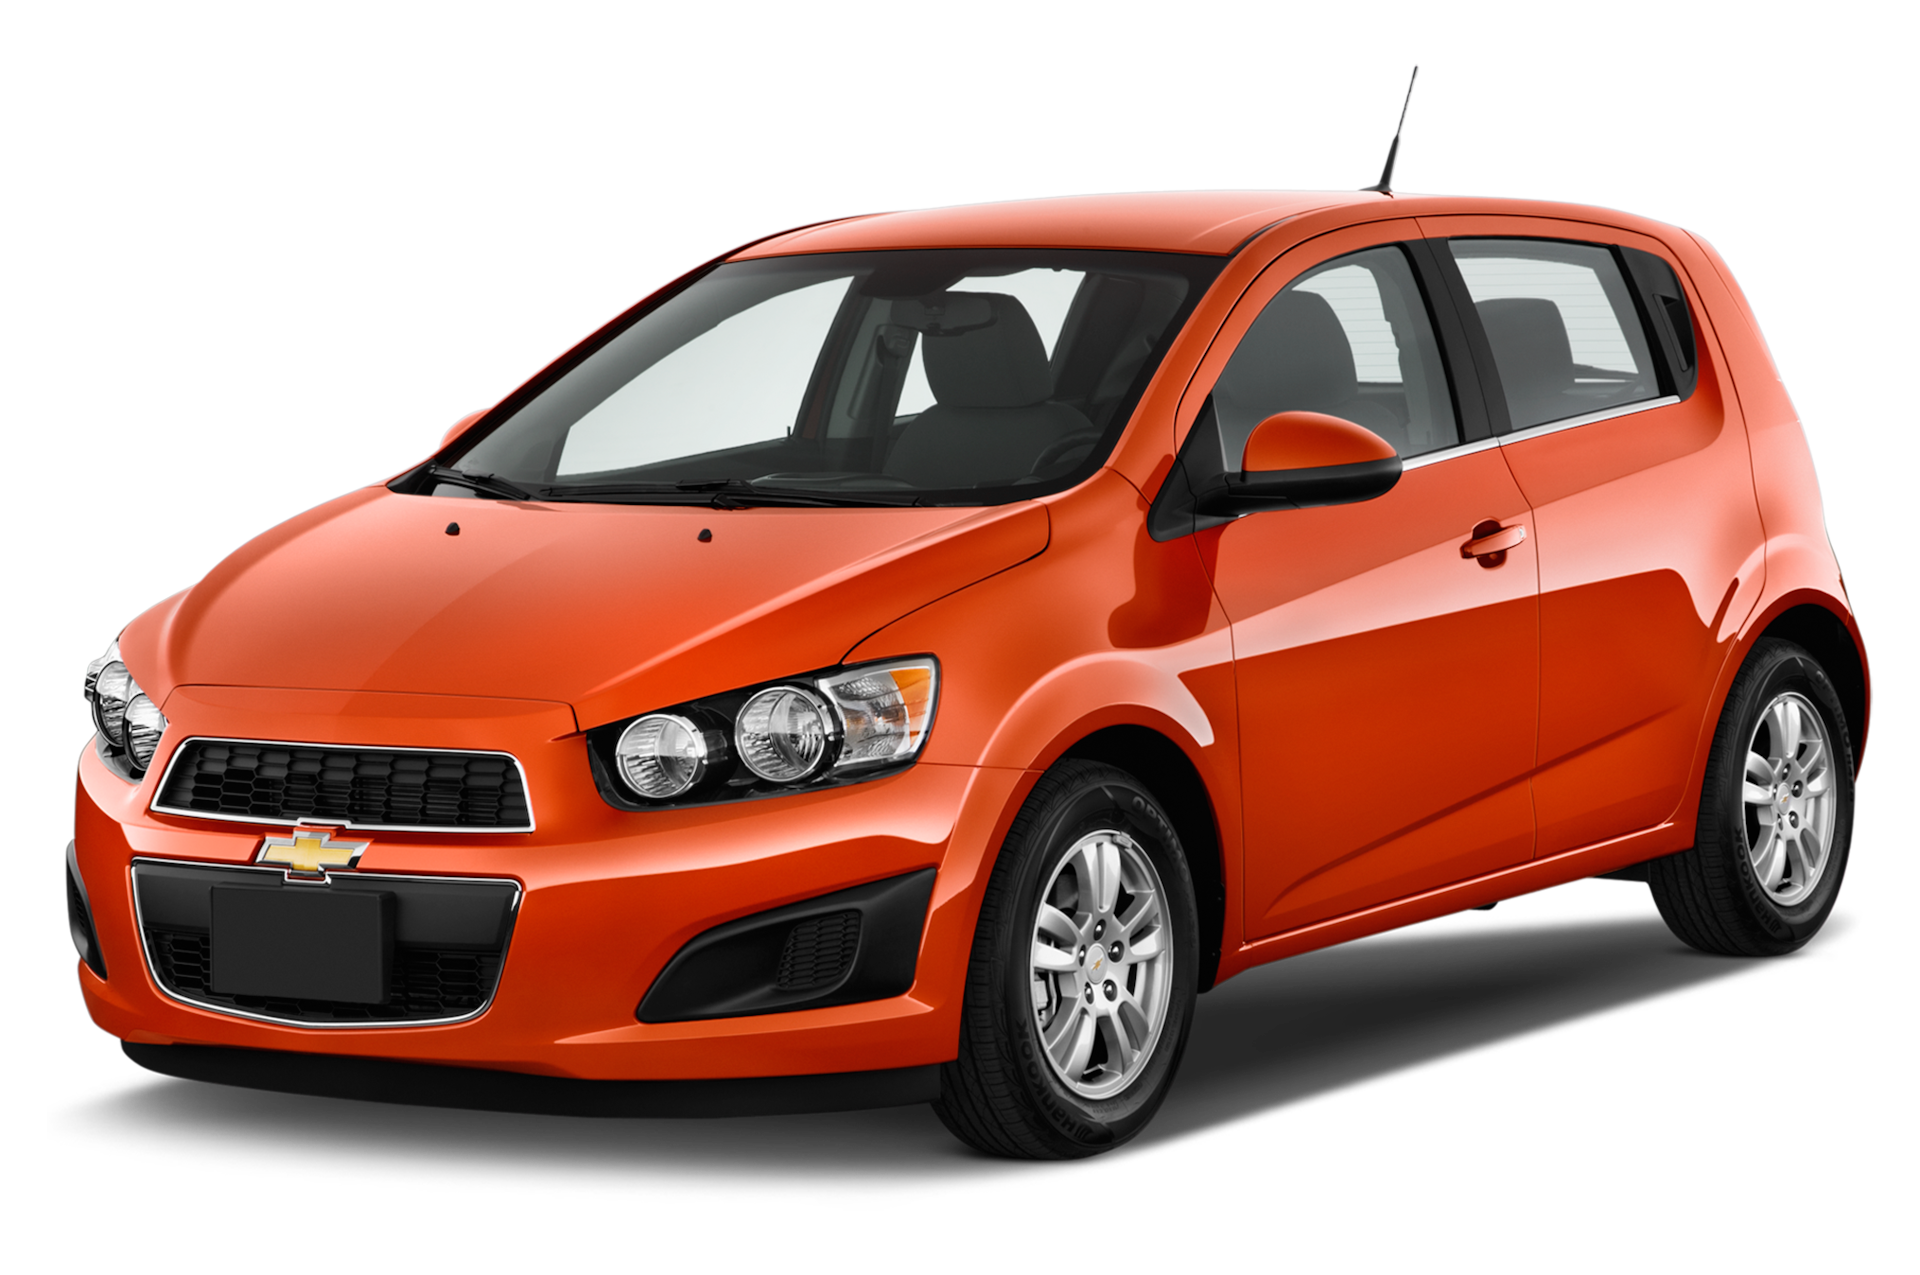 2012 Chevrolet Sonic Prices, Reviews, and Photos - MotorTrend